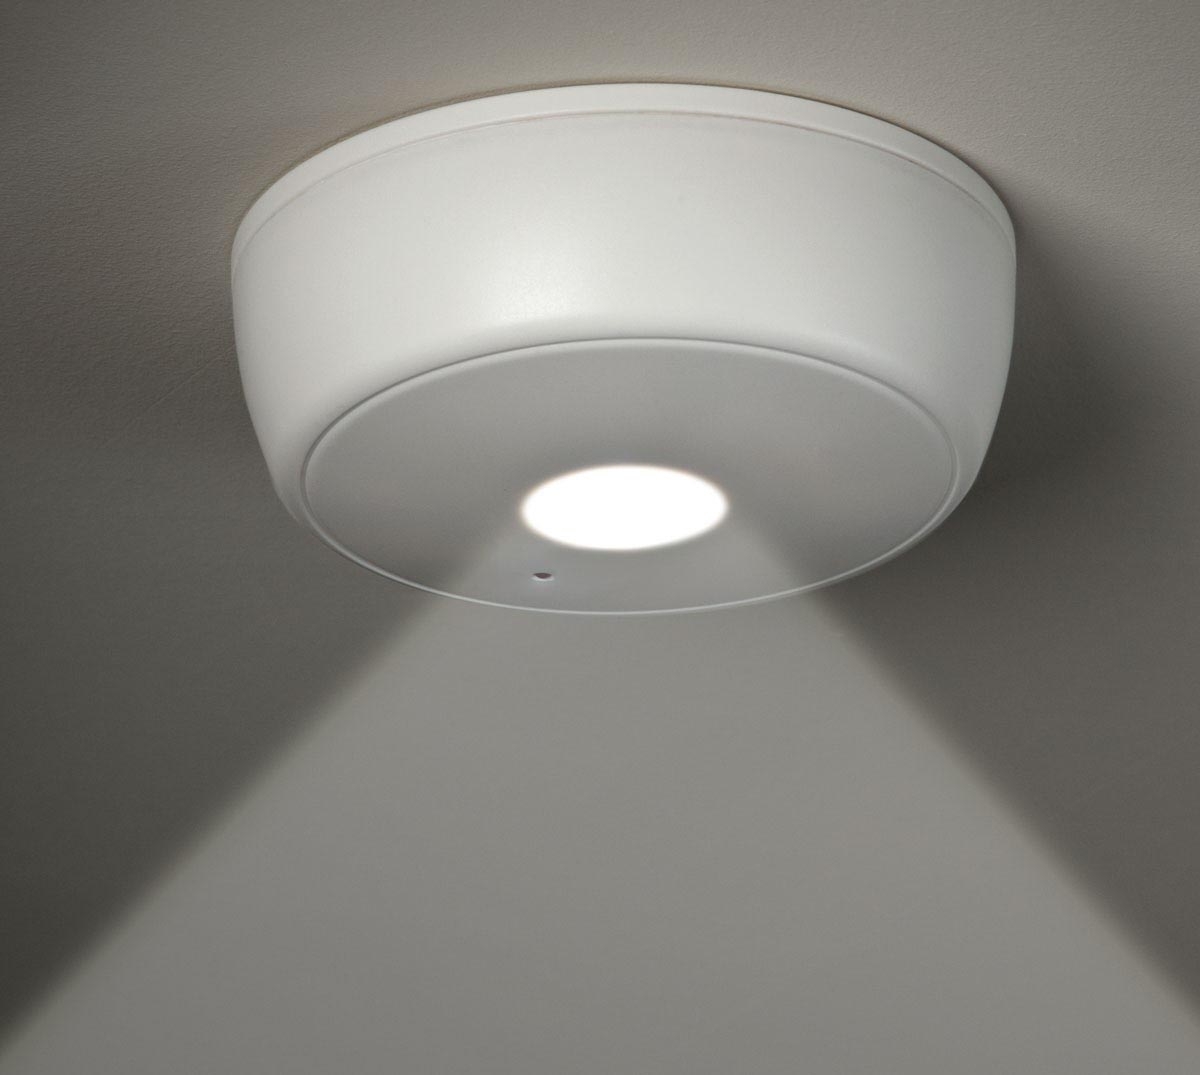 Permalink to Best Cordless Ceiling Light